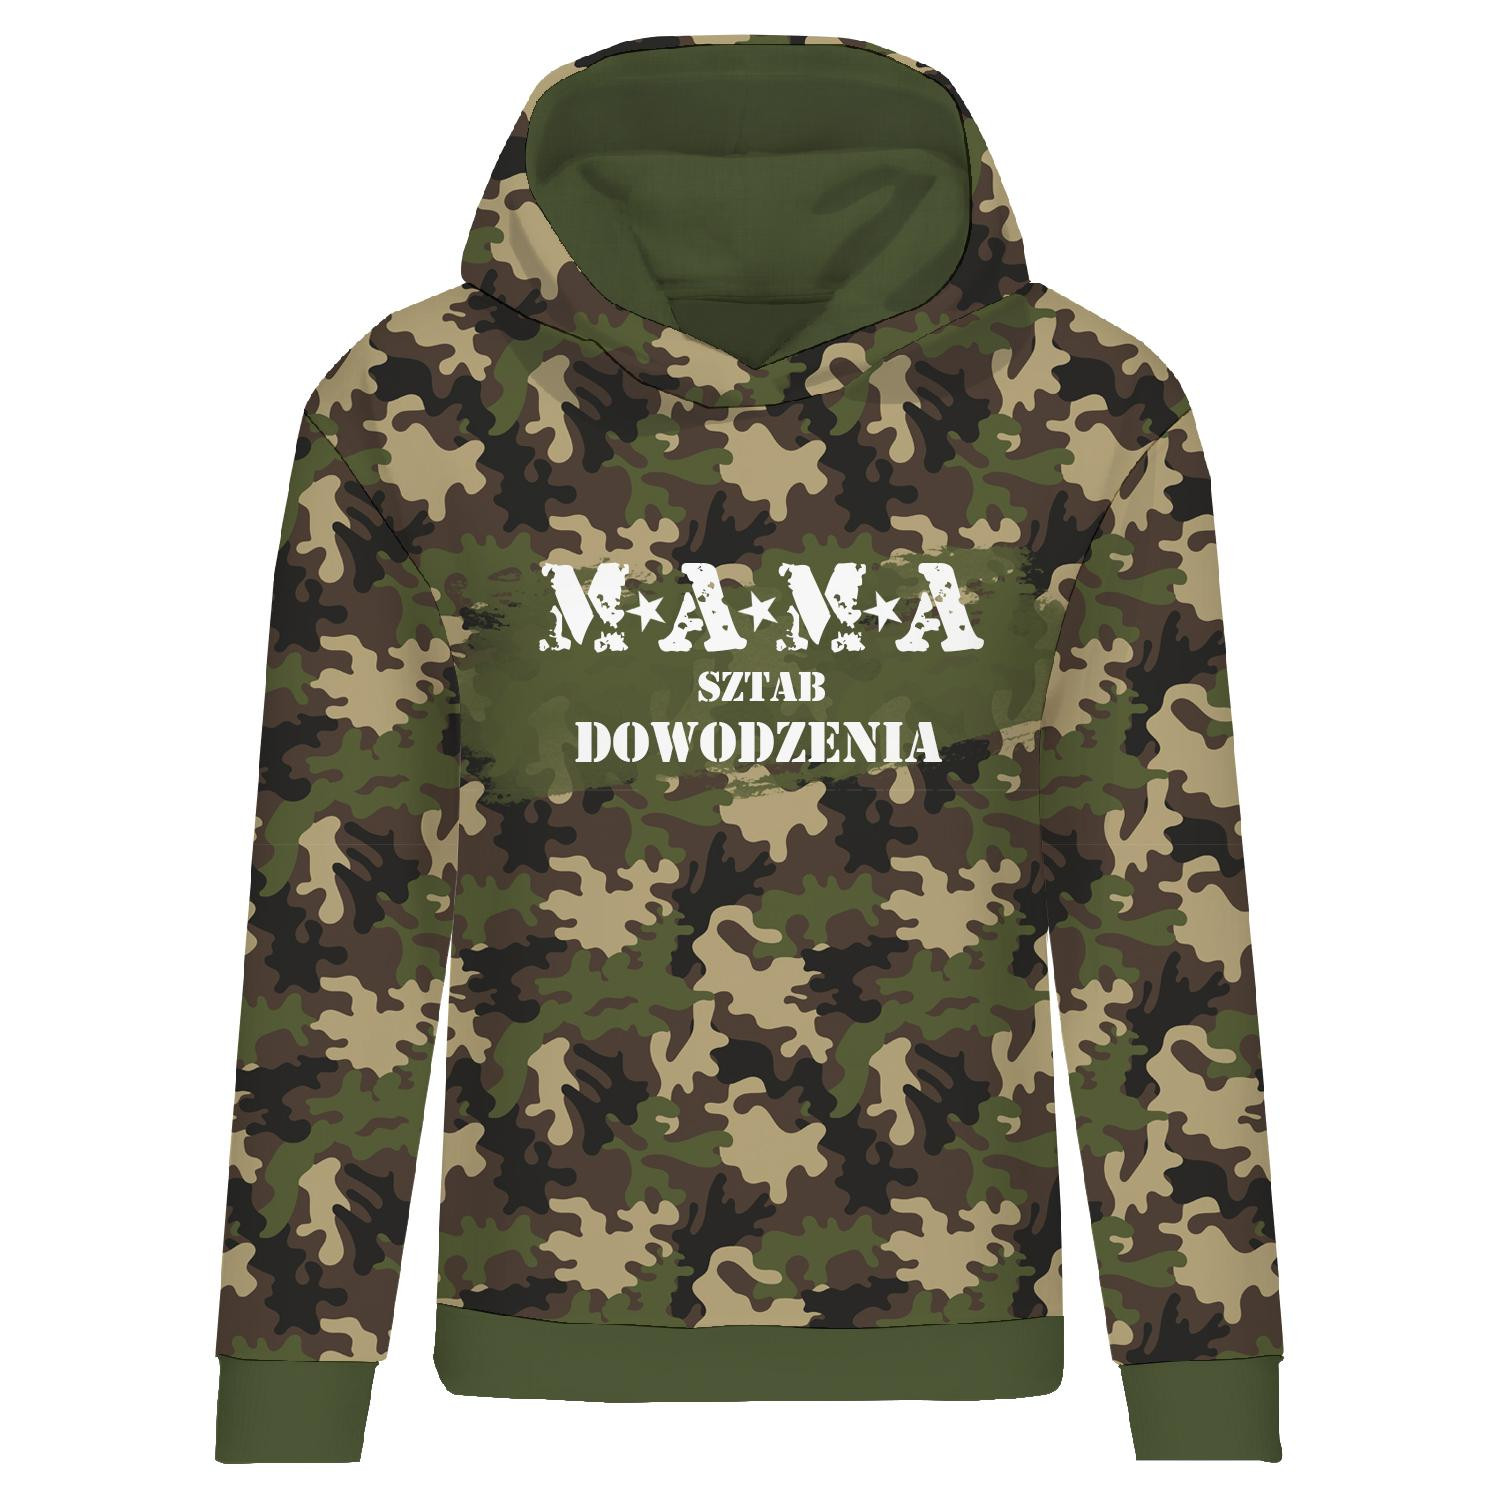 CLASSIC WOMEN’S HOODIE (POLA) - MAMA / camouflage - looped knit fabric 